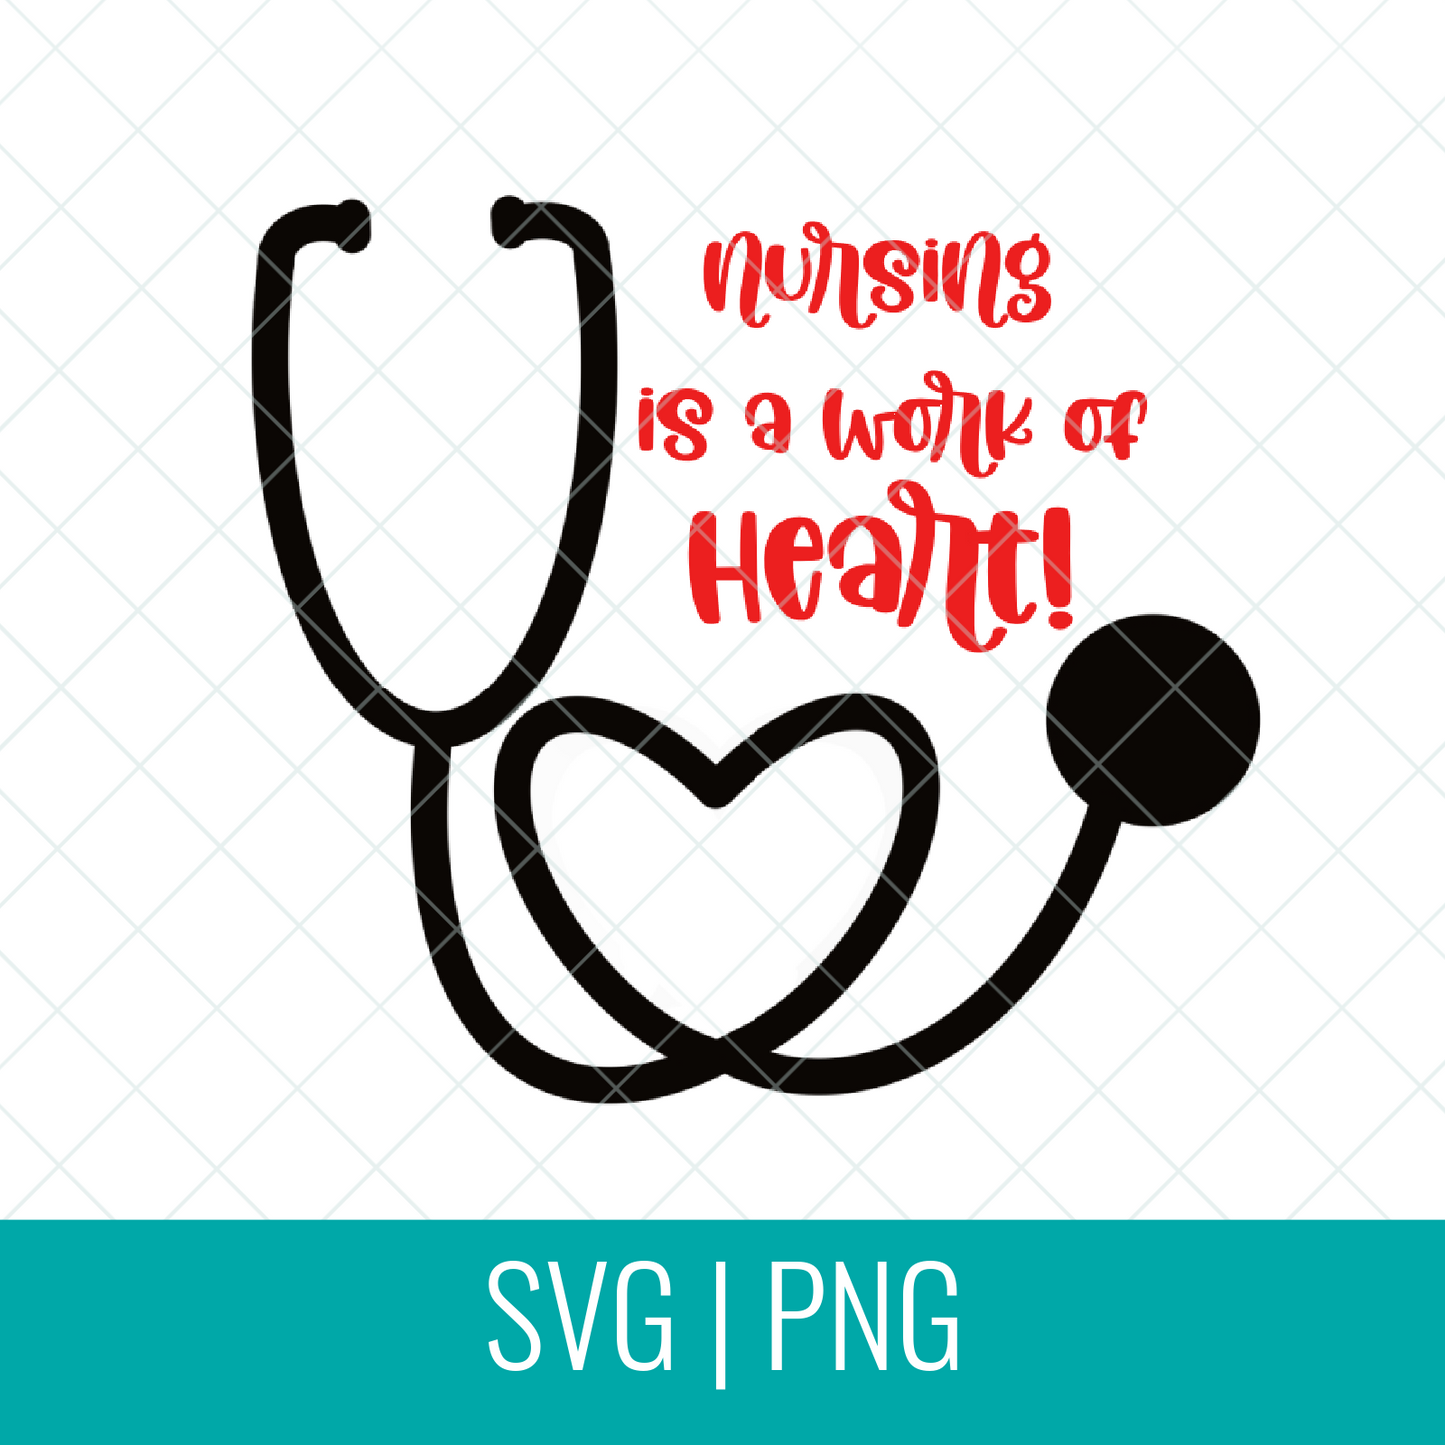 Nursing Is A Work Of Heart SVG Cut File and PNG